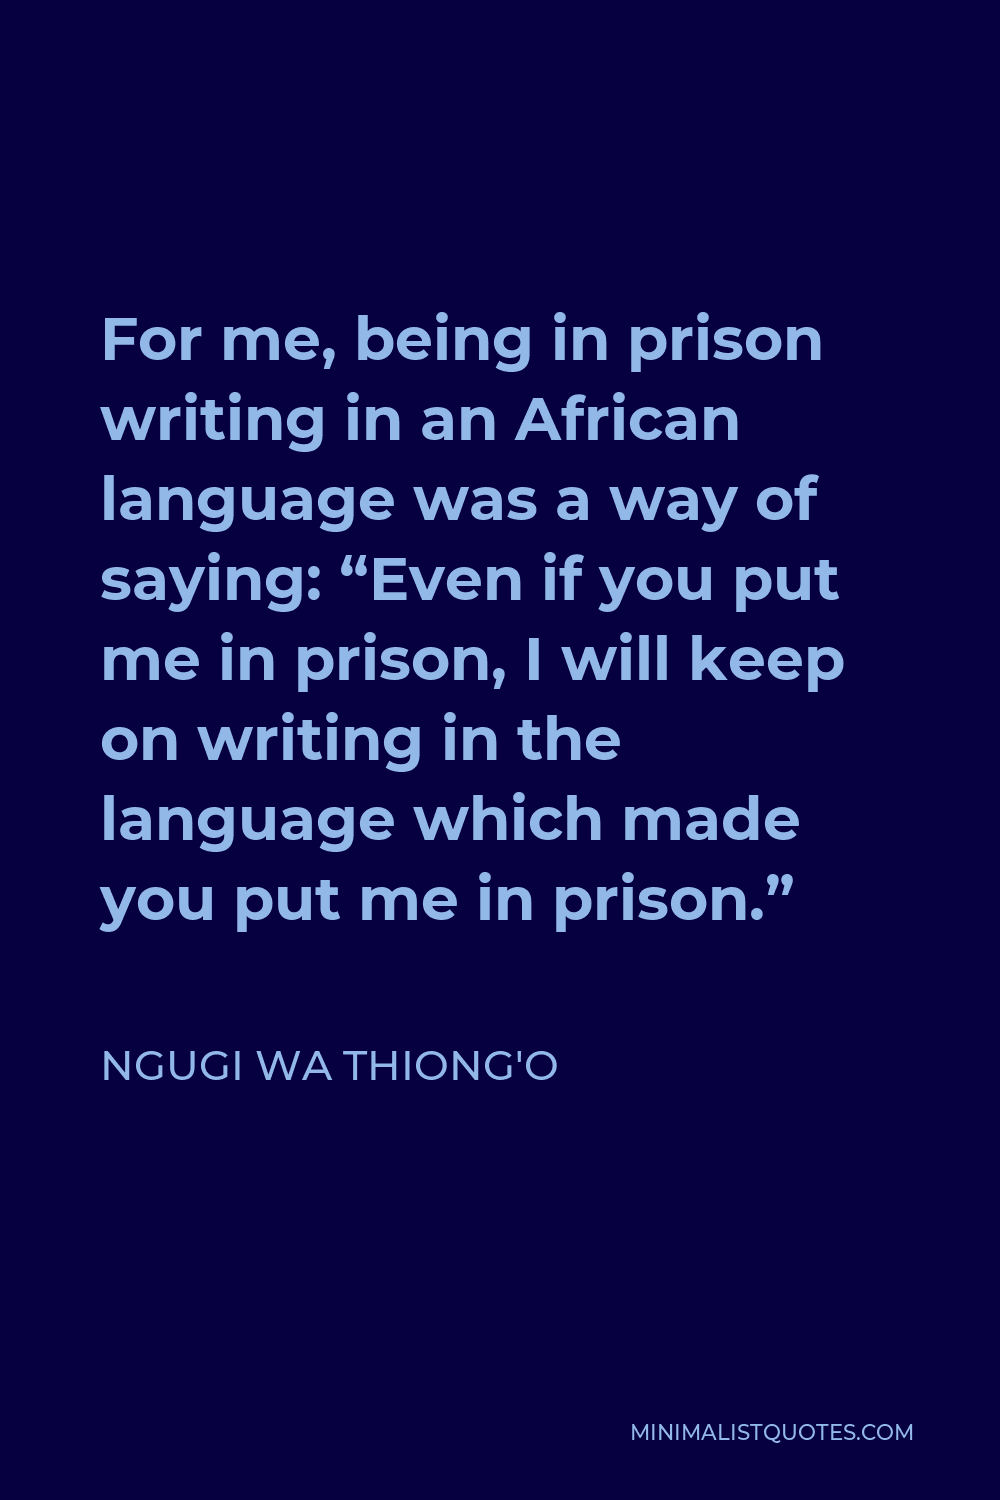 Ngugi wa Thiong'o Quote - For me, being in prison writing in an African language was a way of saying: “Even if you put me in prison, I will keep on writing in the language which made you put me in prison.”